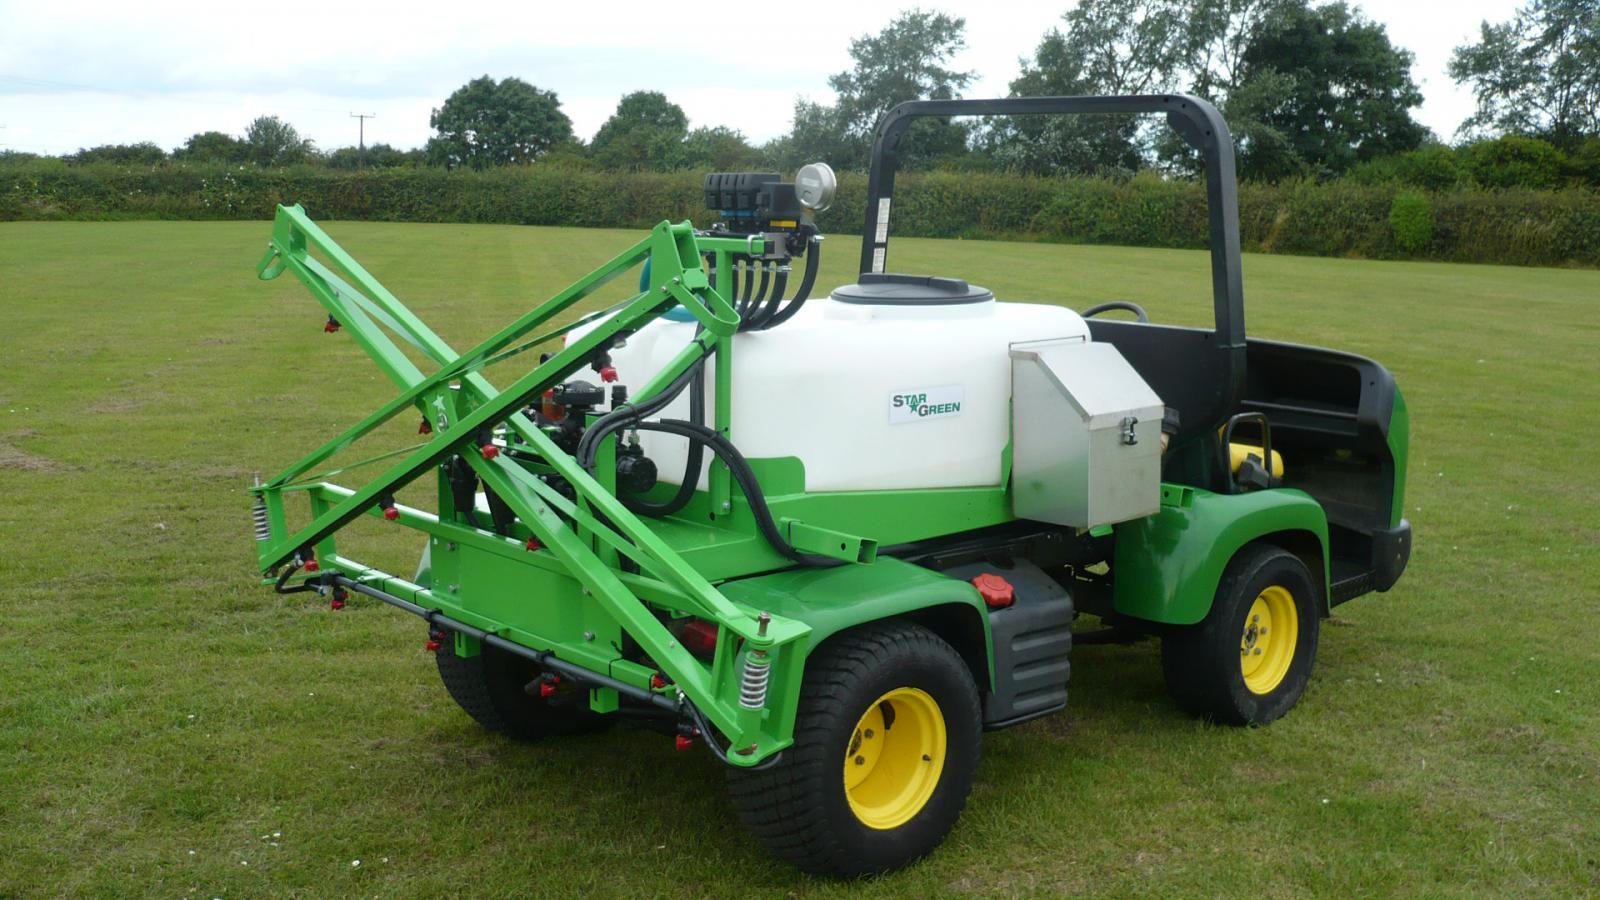 High quality manual fold booms have a positive break back action and open position on both DM450Pro and DM700Pro UTV Demount Amenity Sprayers